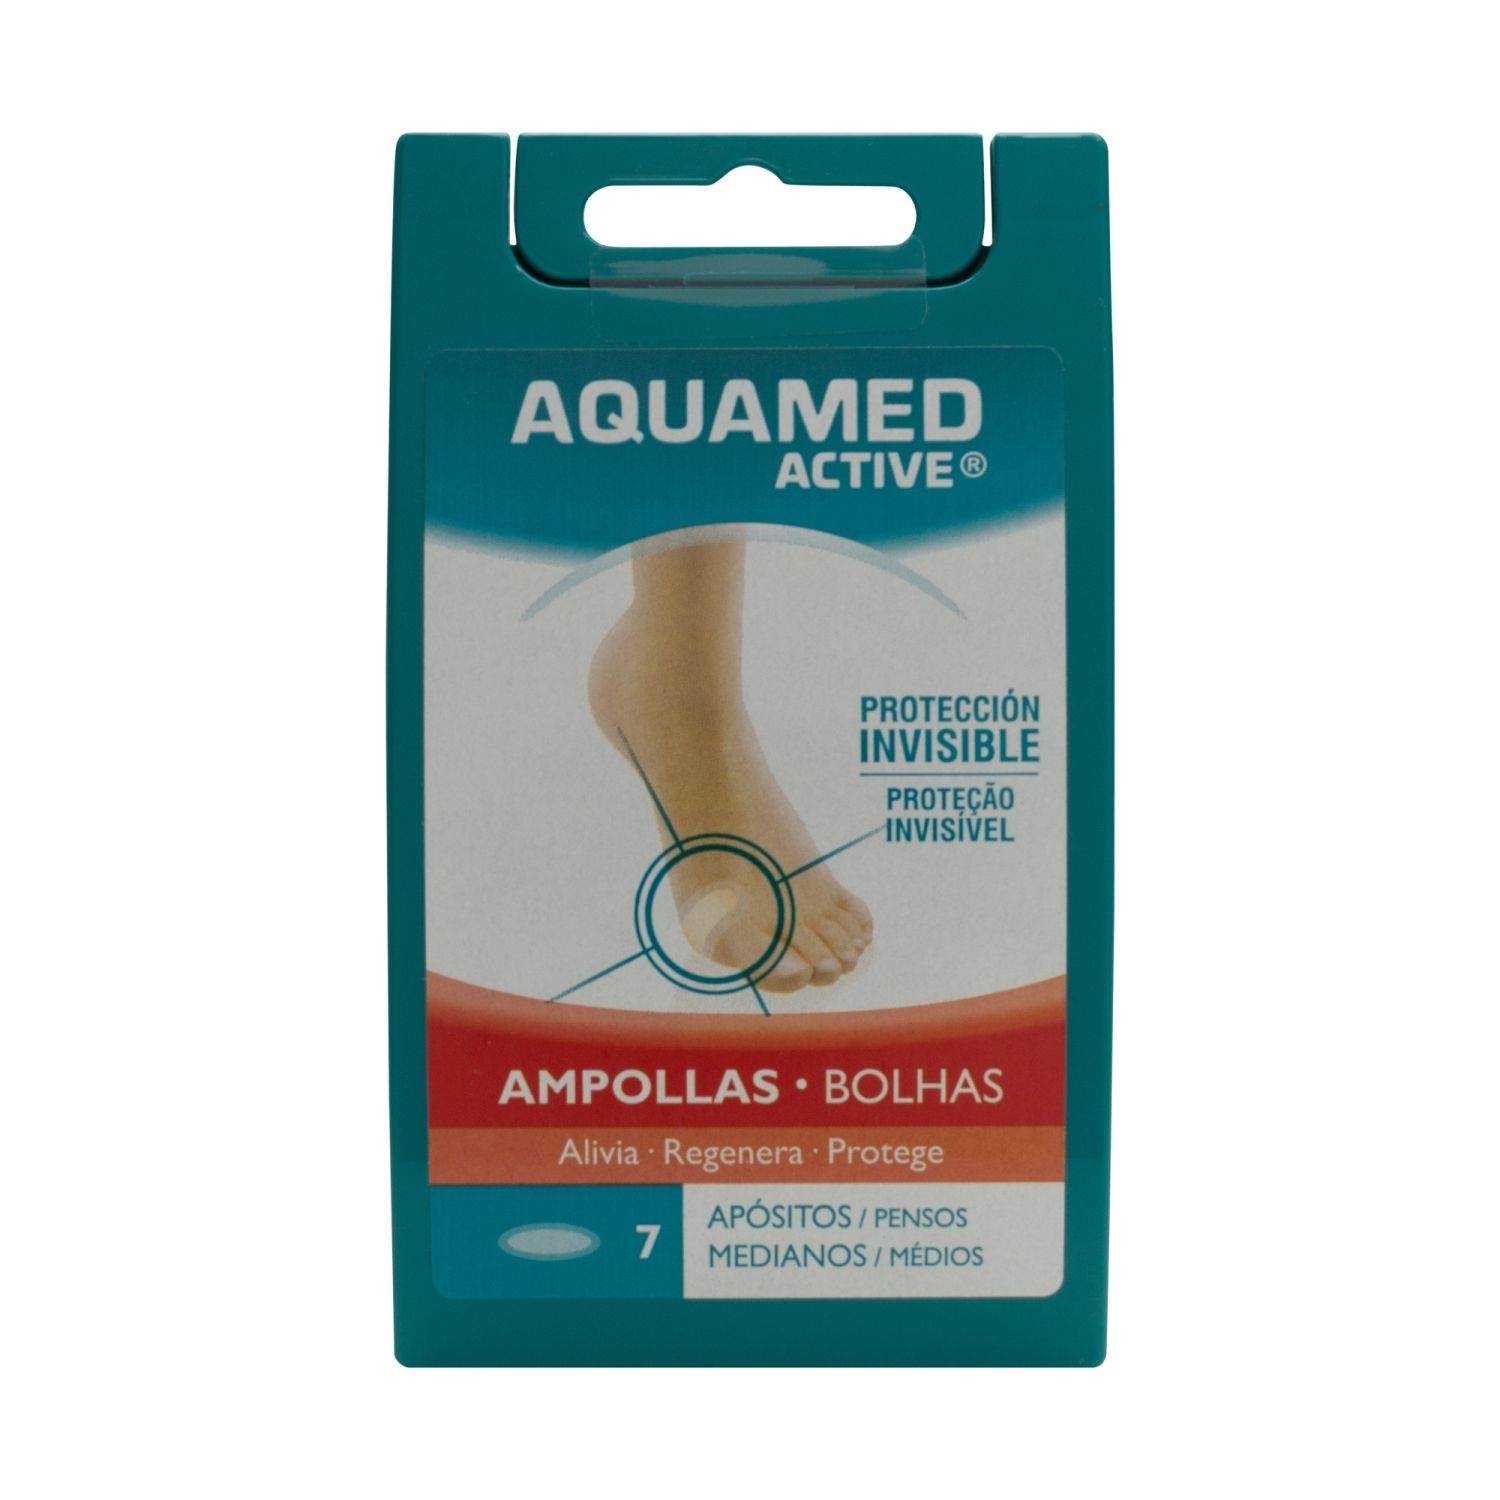 aquamed active care ampollas 7uds